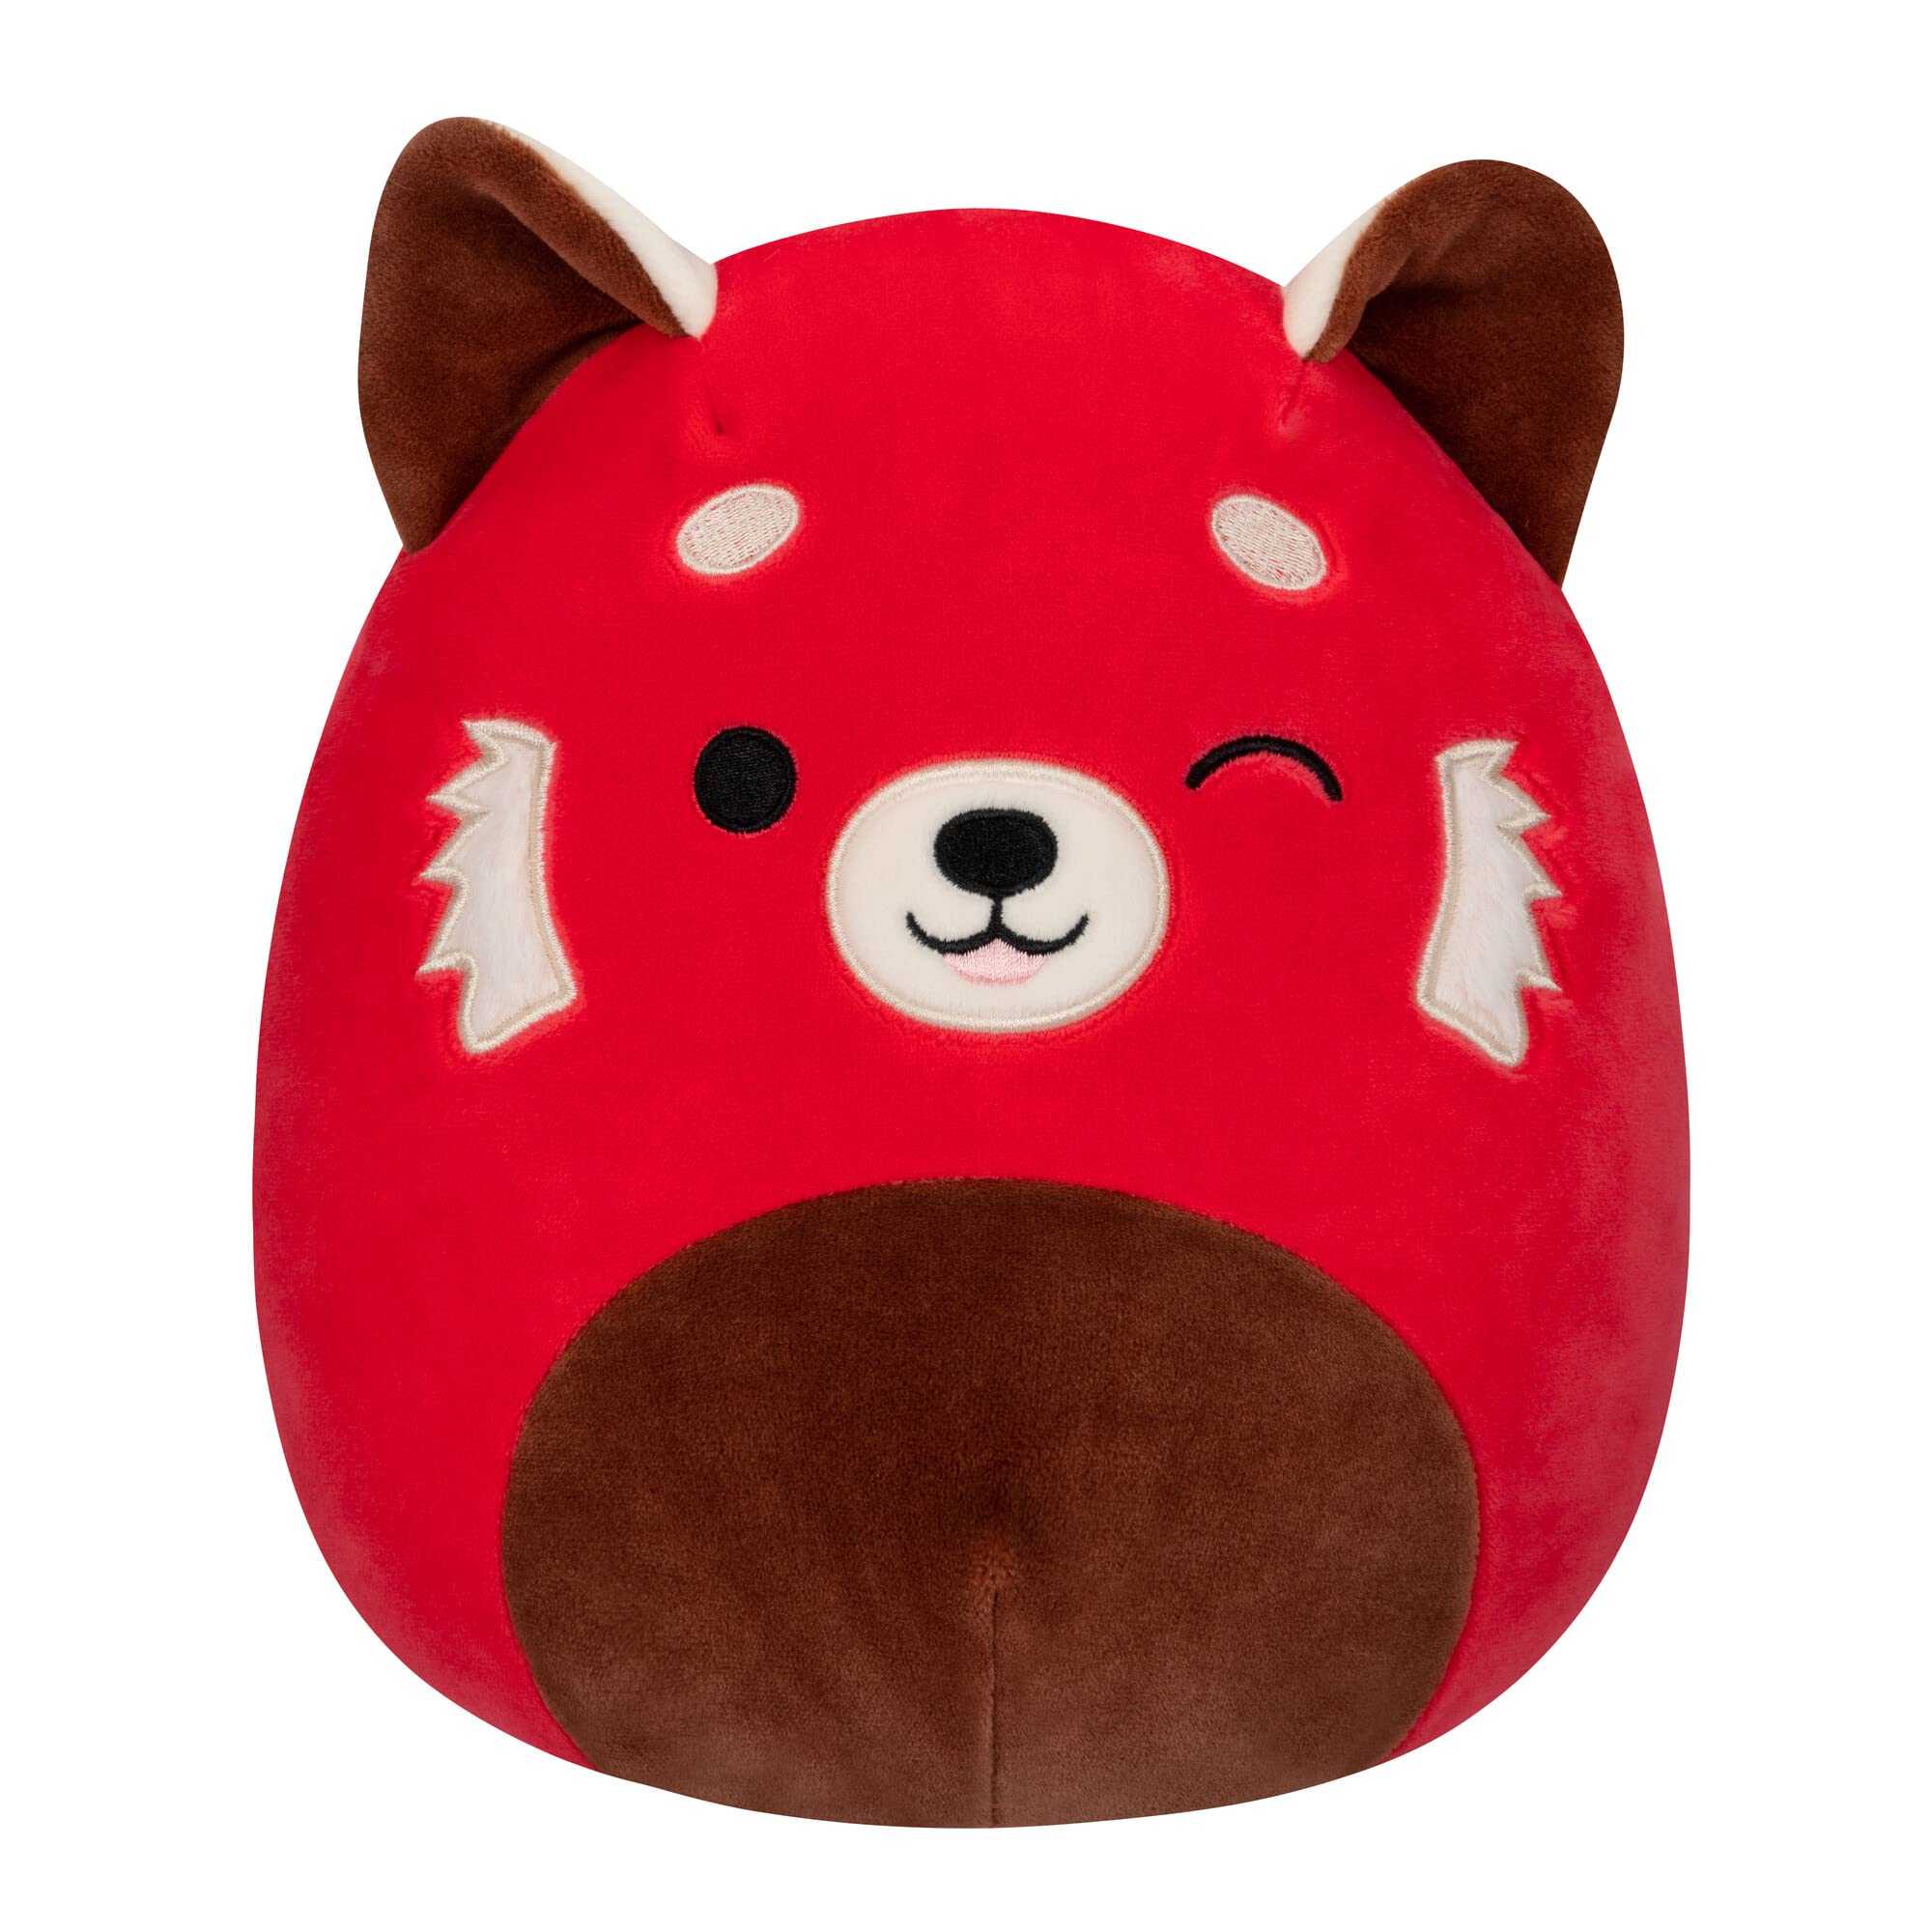 SHOP: Squishmallows are the hottest toys of the season so far